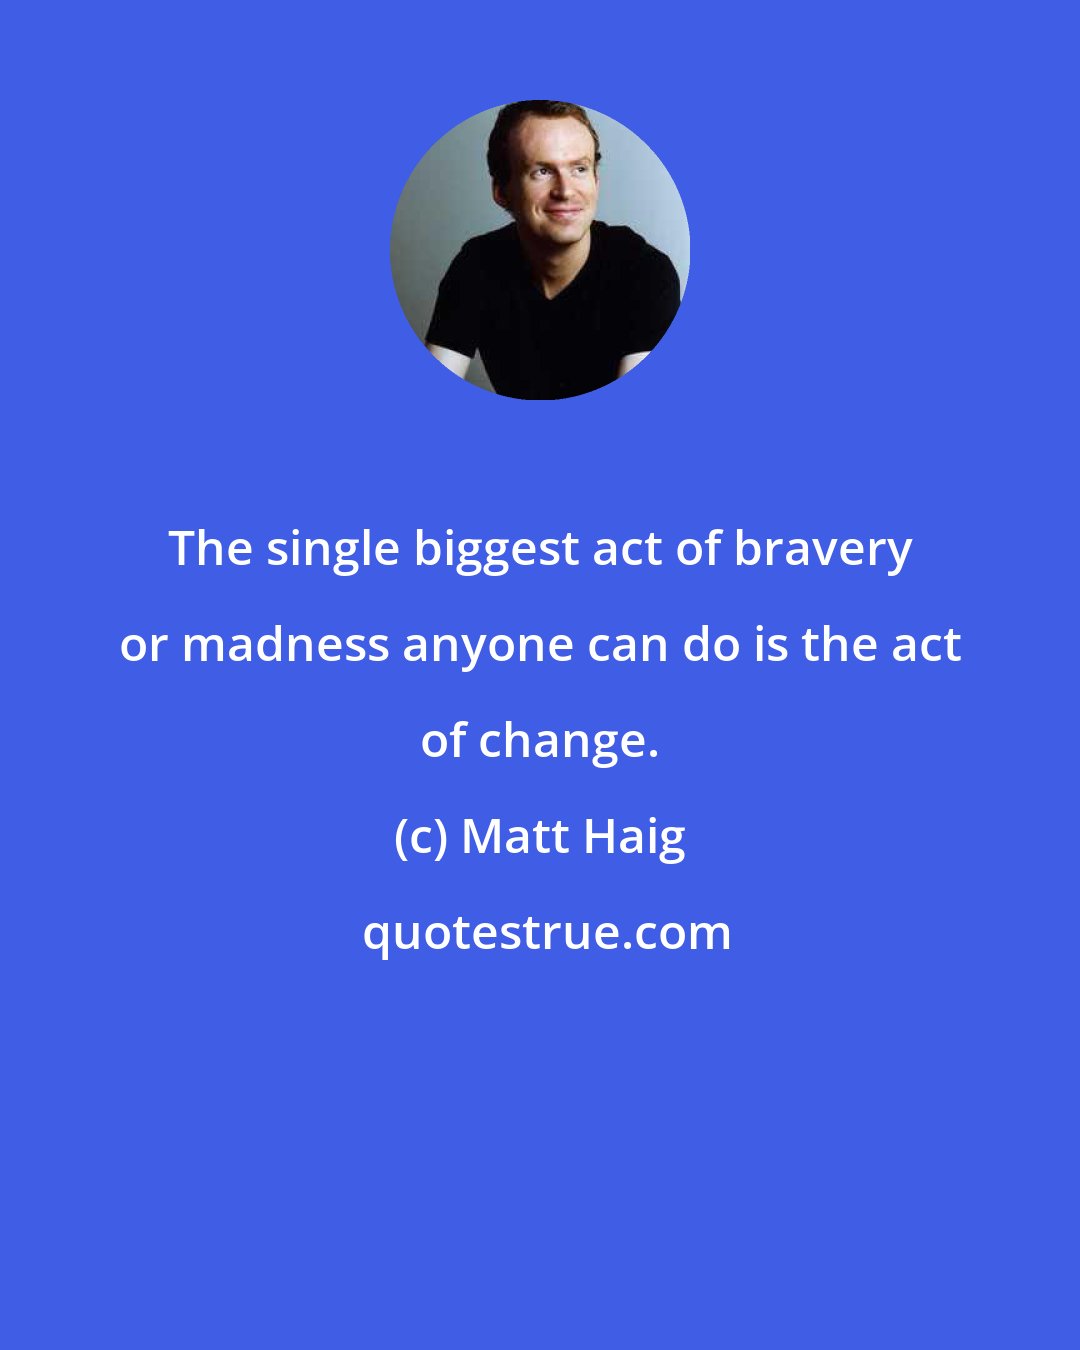 Matt Haig: The single biggest act of bravery or madness anyone can do is the act of change.